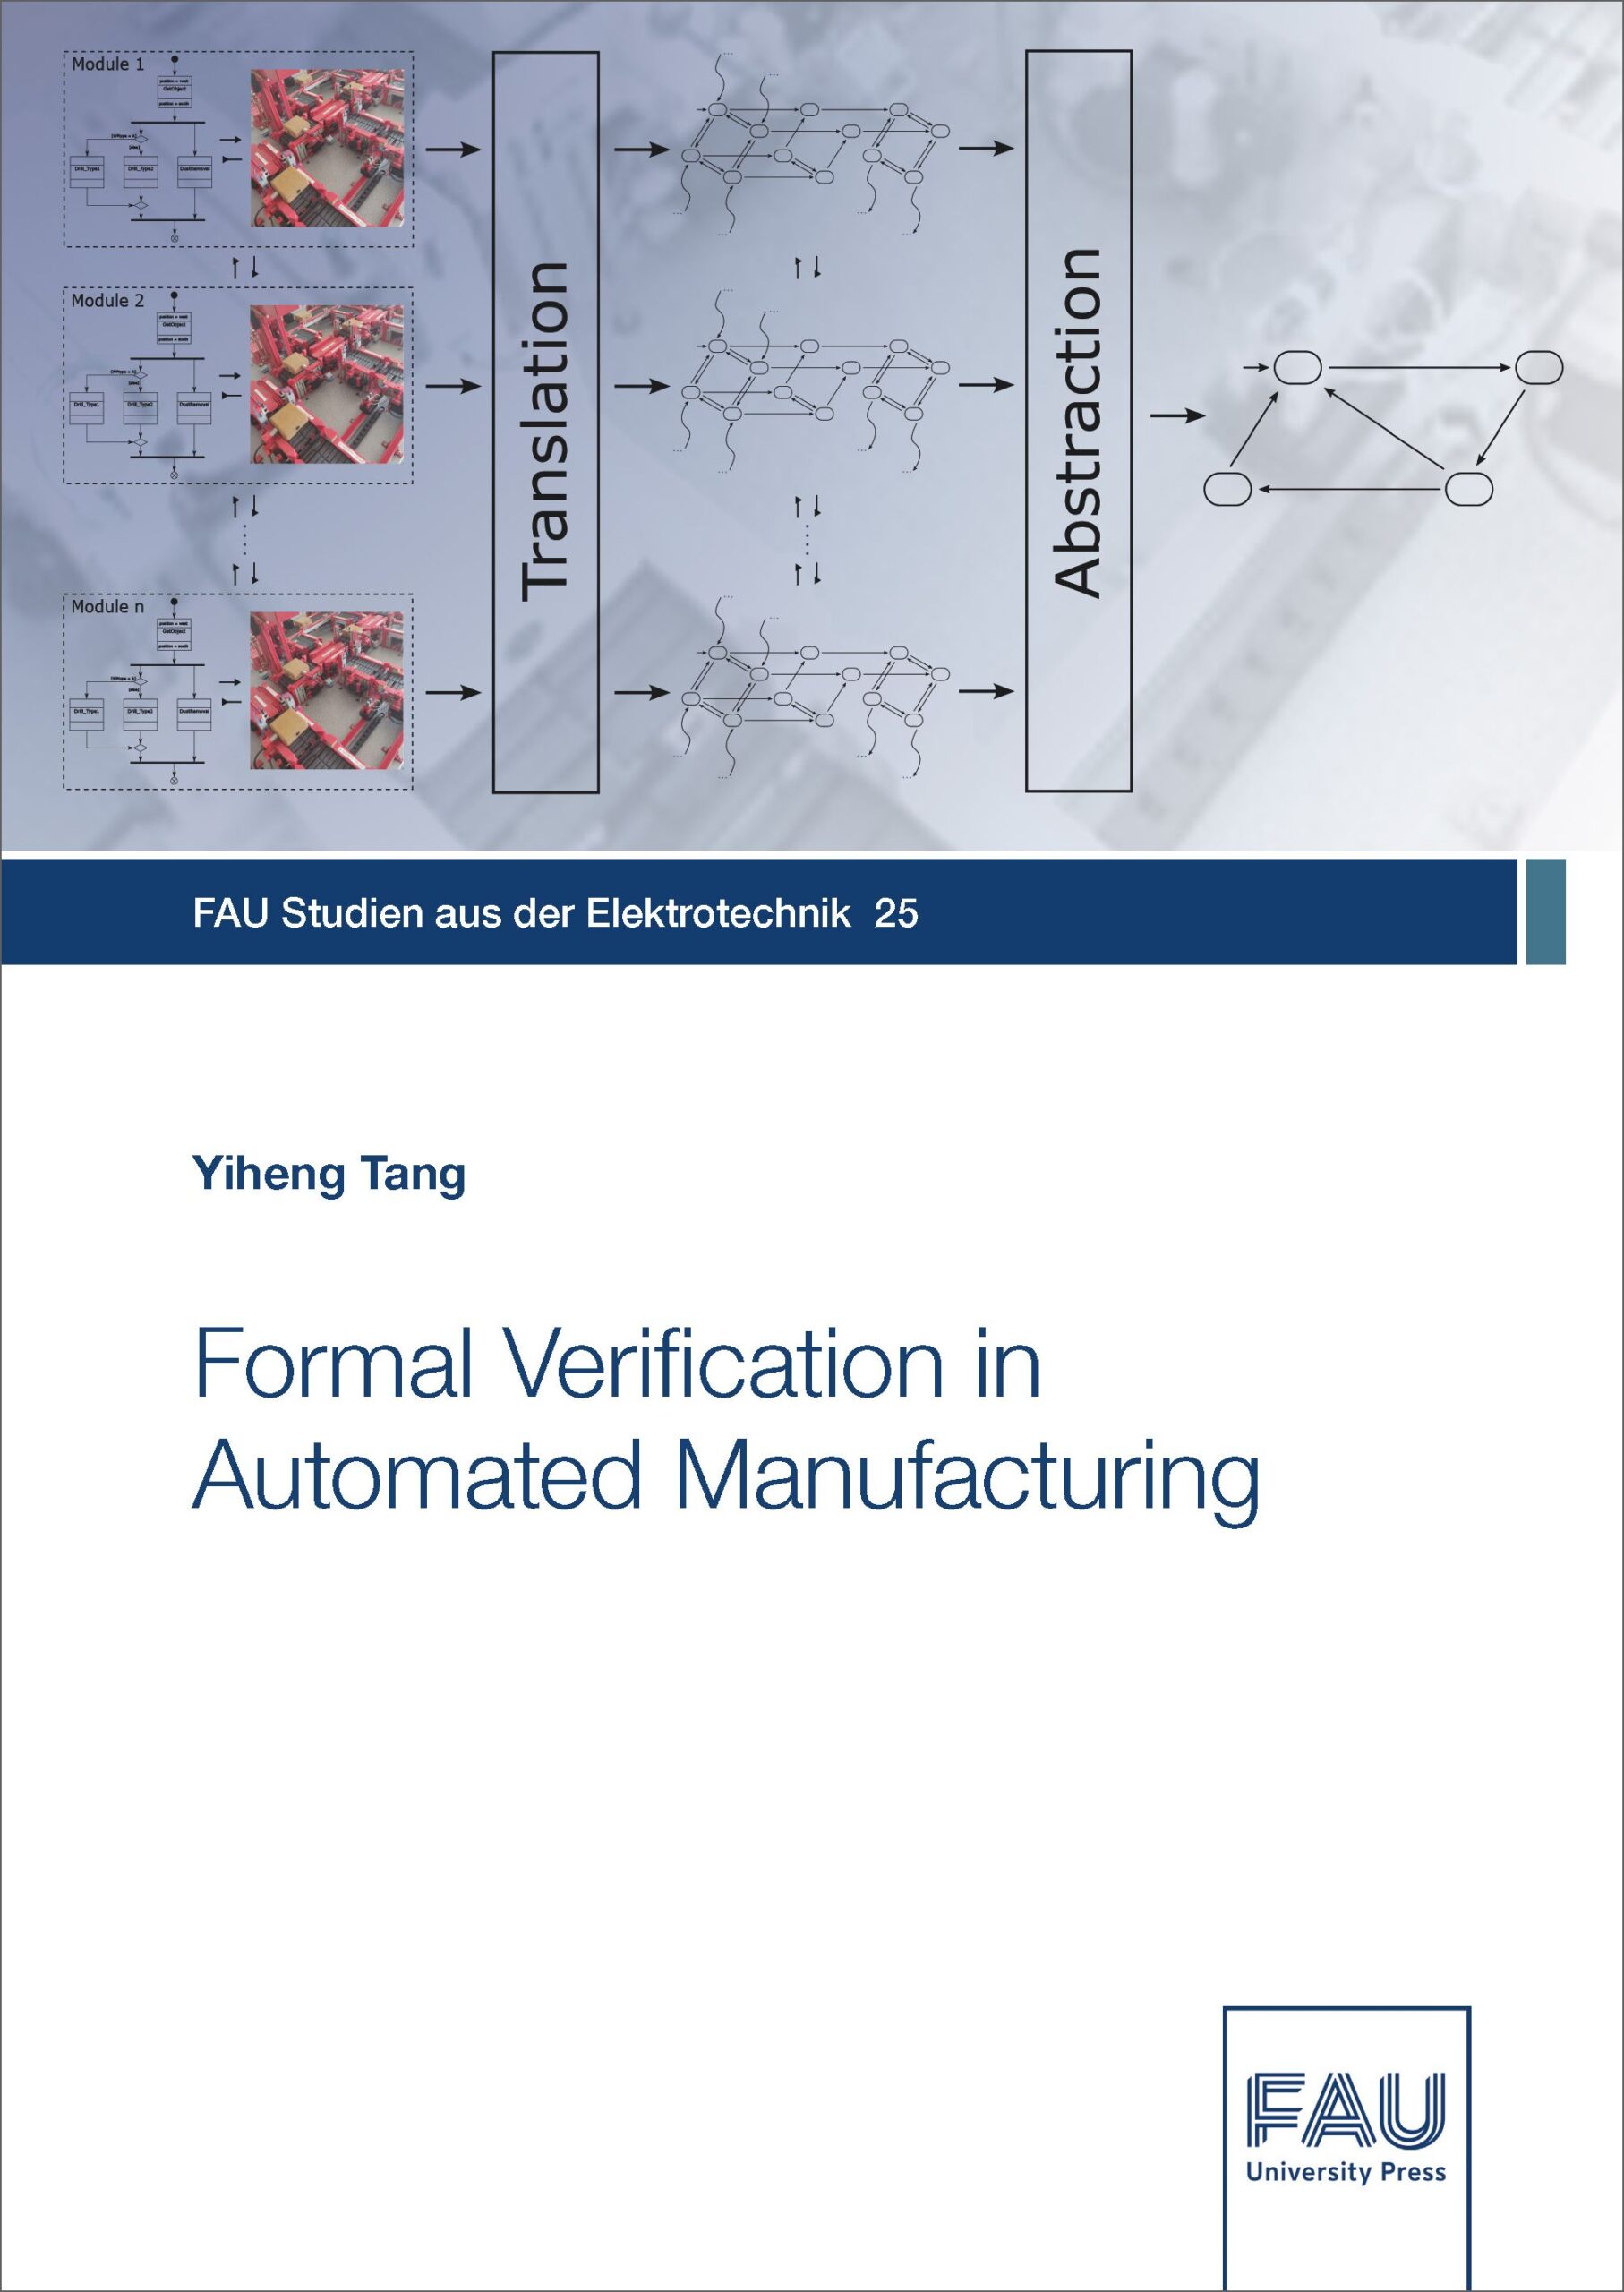 Formal Verification in Automated Manufacturing